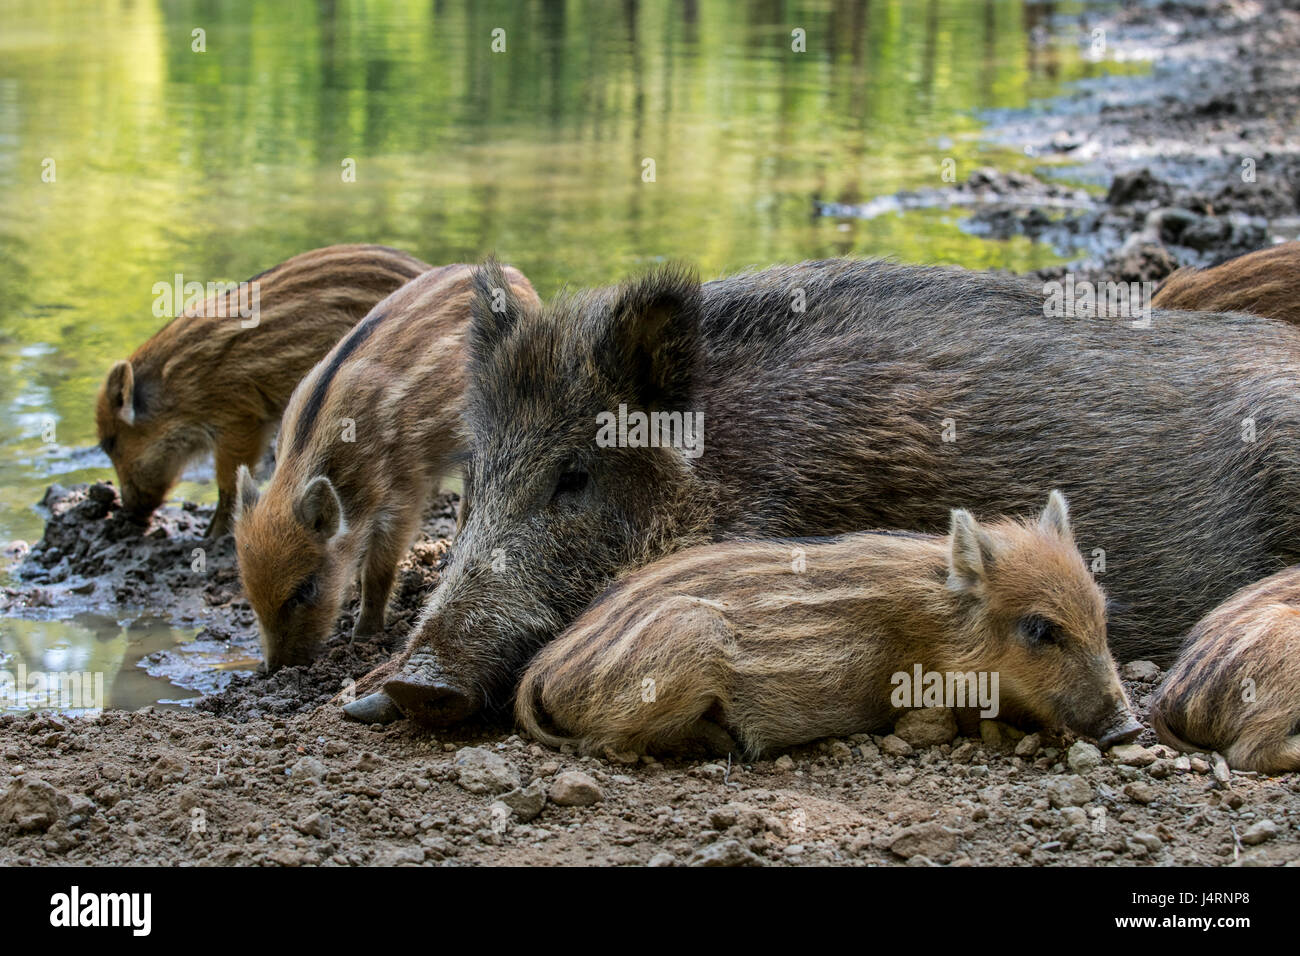 Wild boar (Sus scrofa) sow with piglets sleeping in the mud in spring Stock Photo